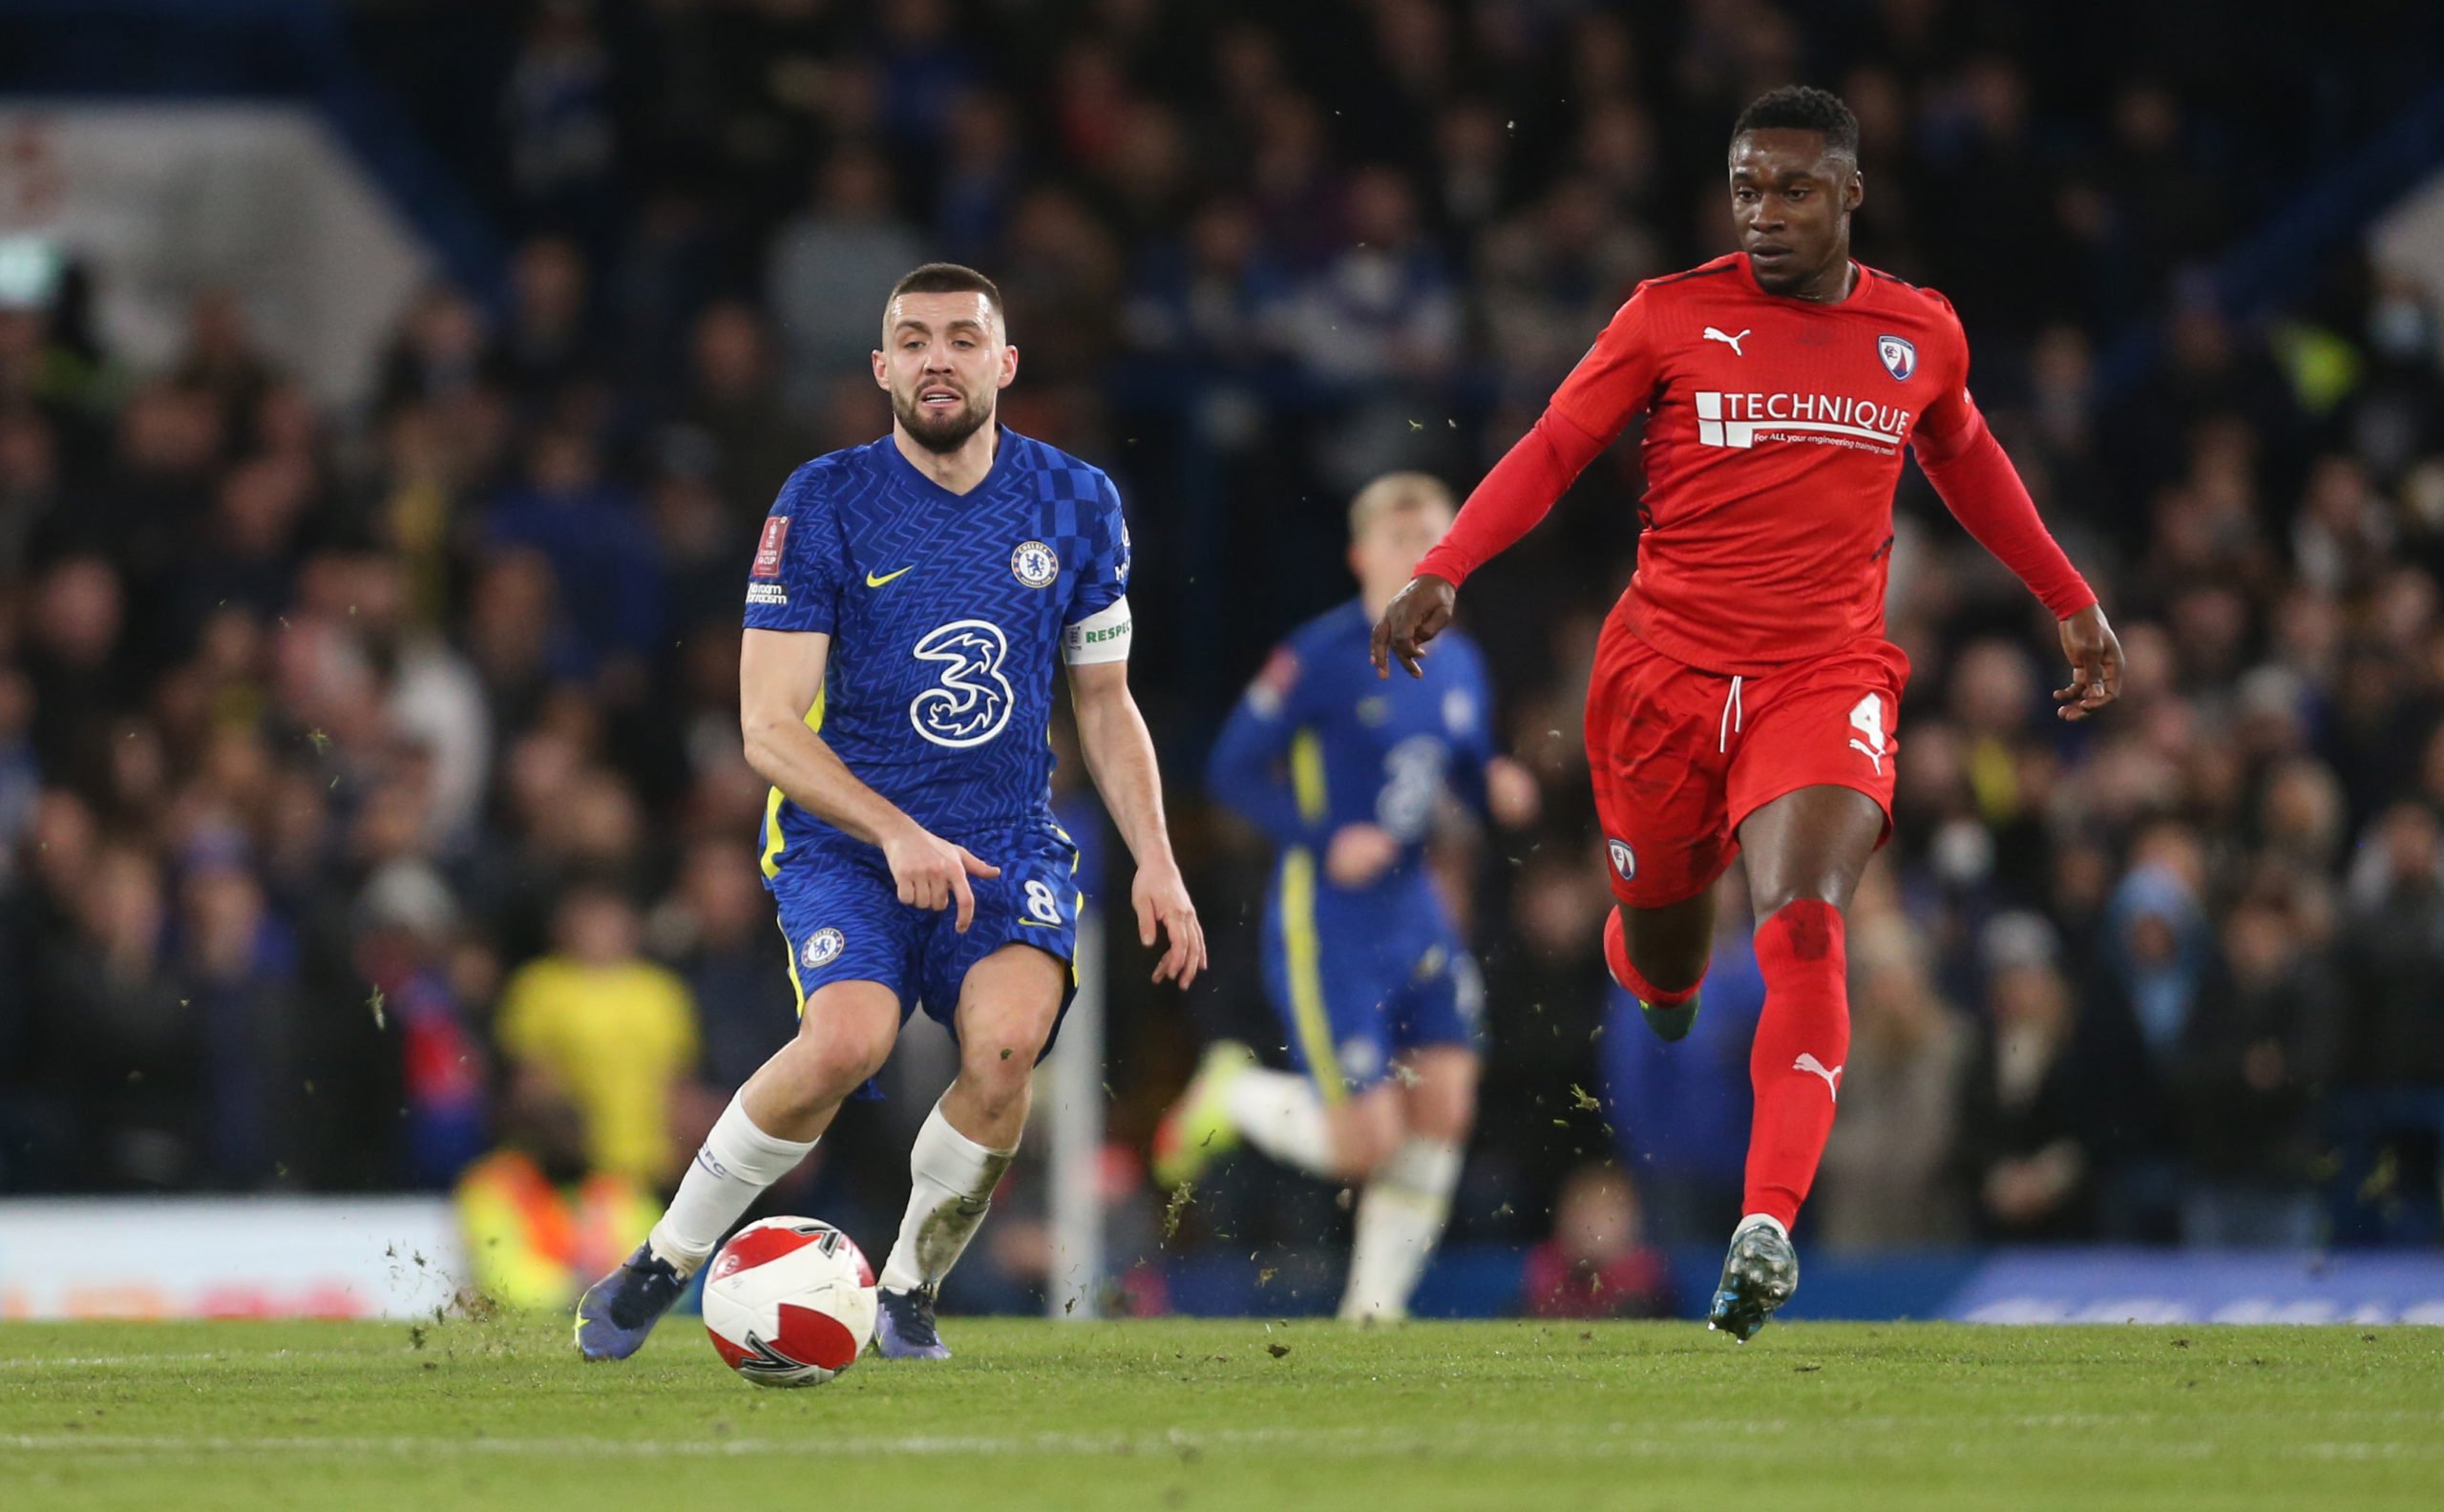 'He's so quick': Chesterfield midfielder says he was blown away by the speed of Chelsea's £40m man after facing him